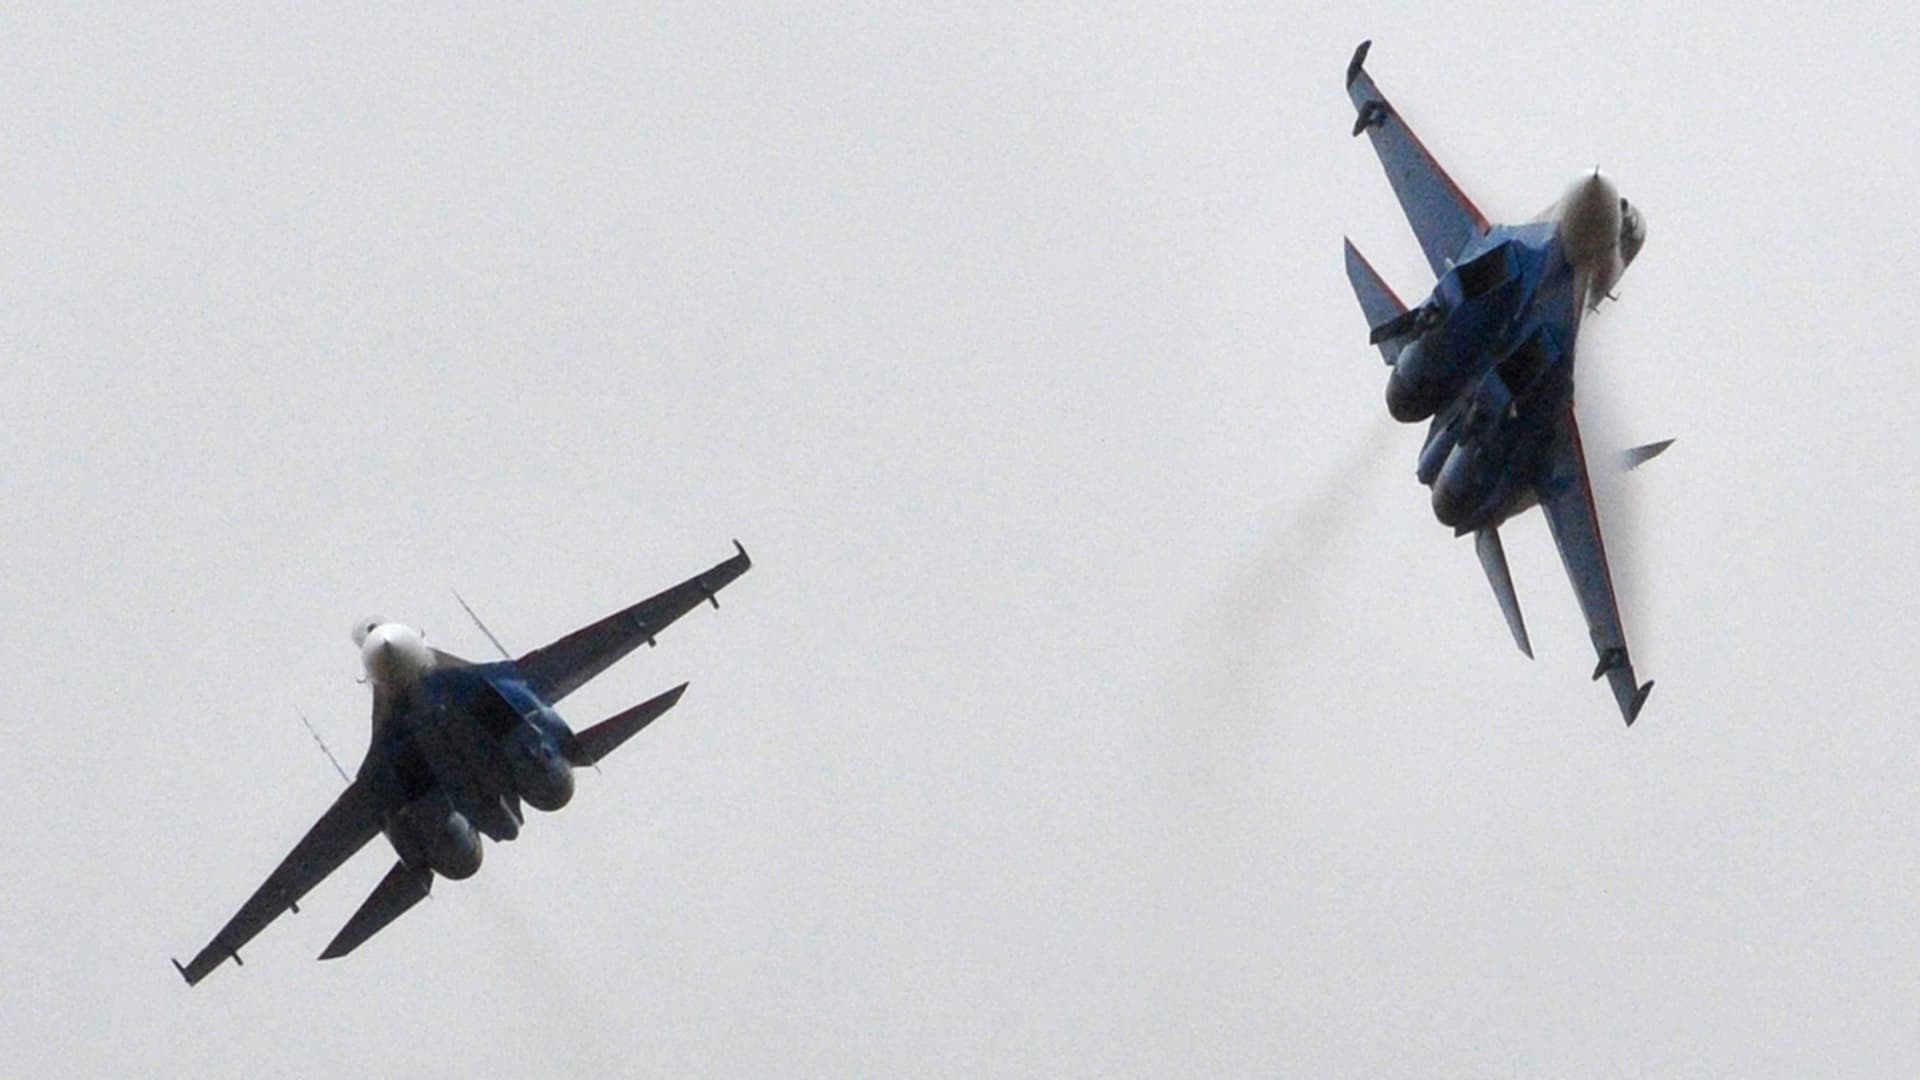 Two Sukhoi Su-27 fighters perform during celebrations of the 10th anniversary of the Russian air force base of the Collective Security Treaty Organization (CSTO) in Kant, about 20 km outside Bishkek on October 27, 2013. AFP PHOTO / VYACHESLAV OSELEDKO(Photo credit should read VYACHESLAV OSELEDKO/AFP via Getty Images)